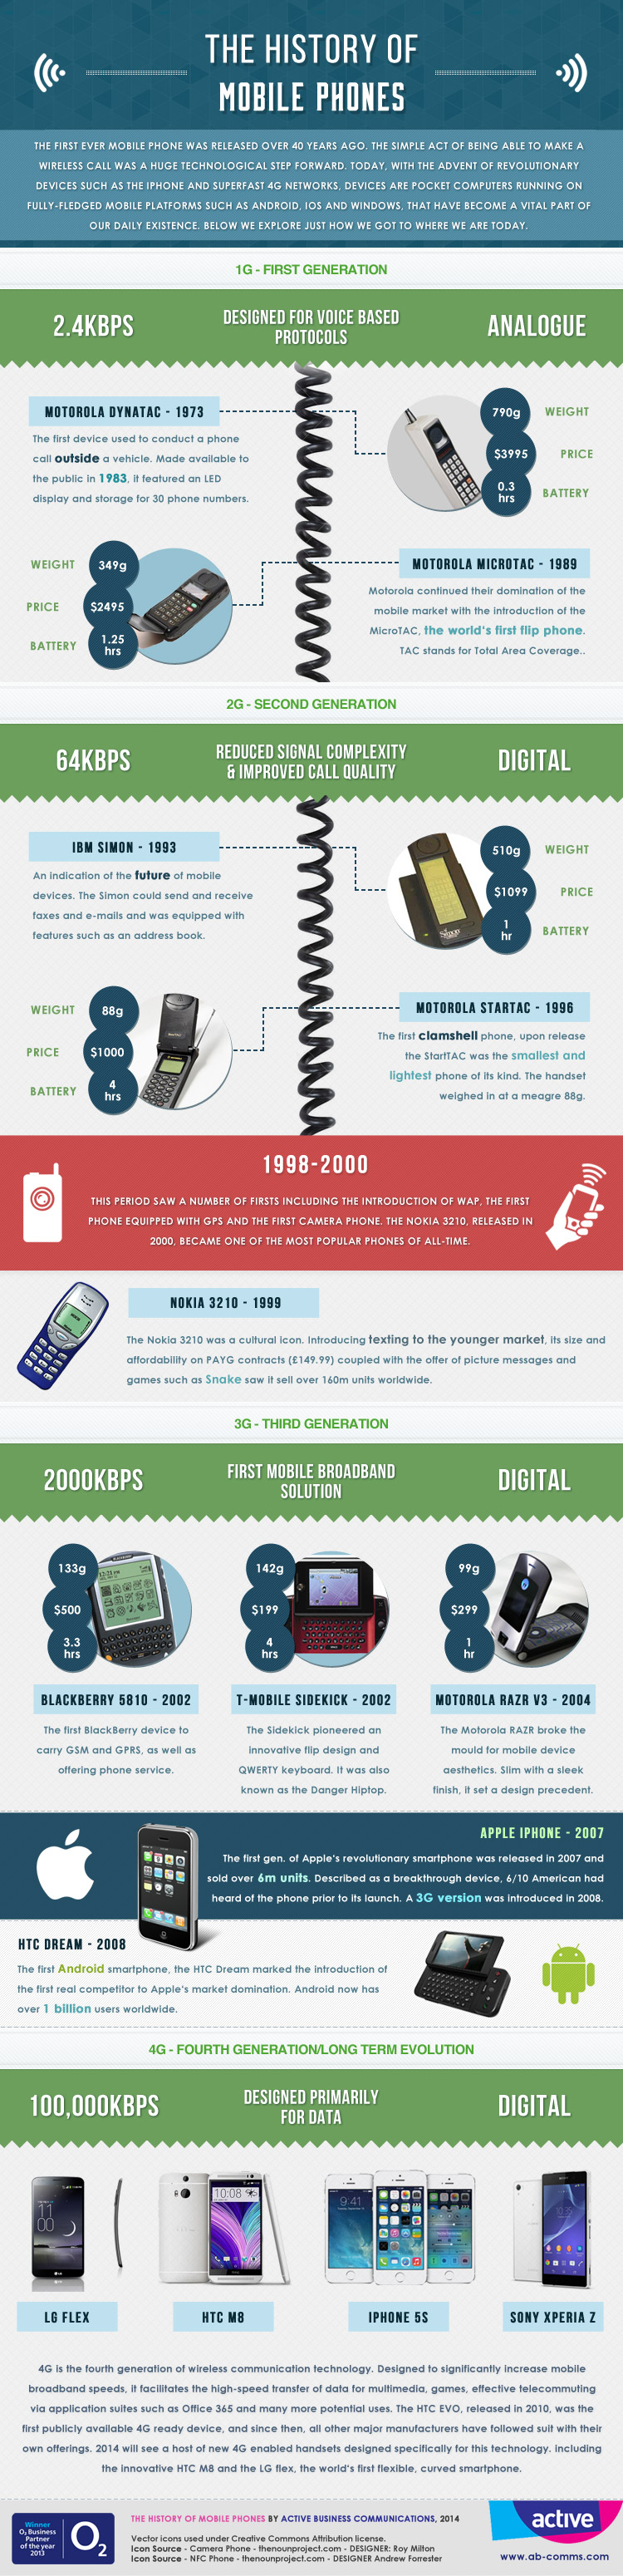 The History of the Mobile Phone